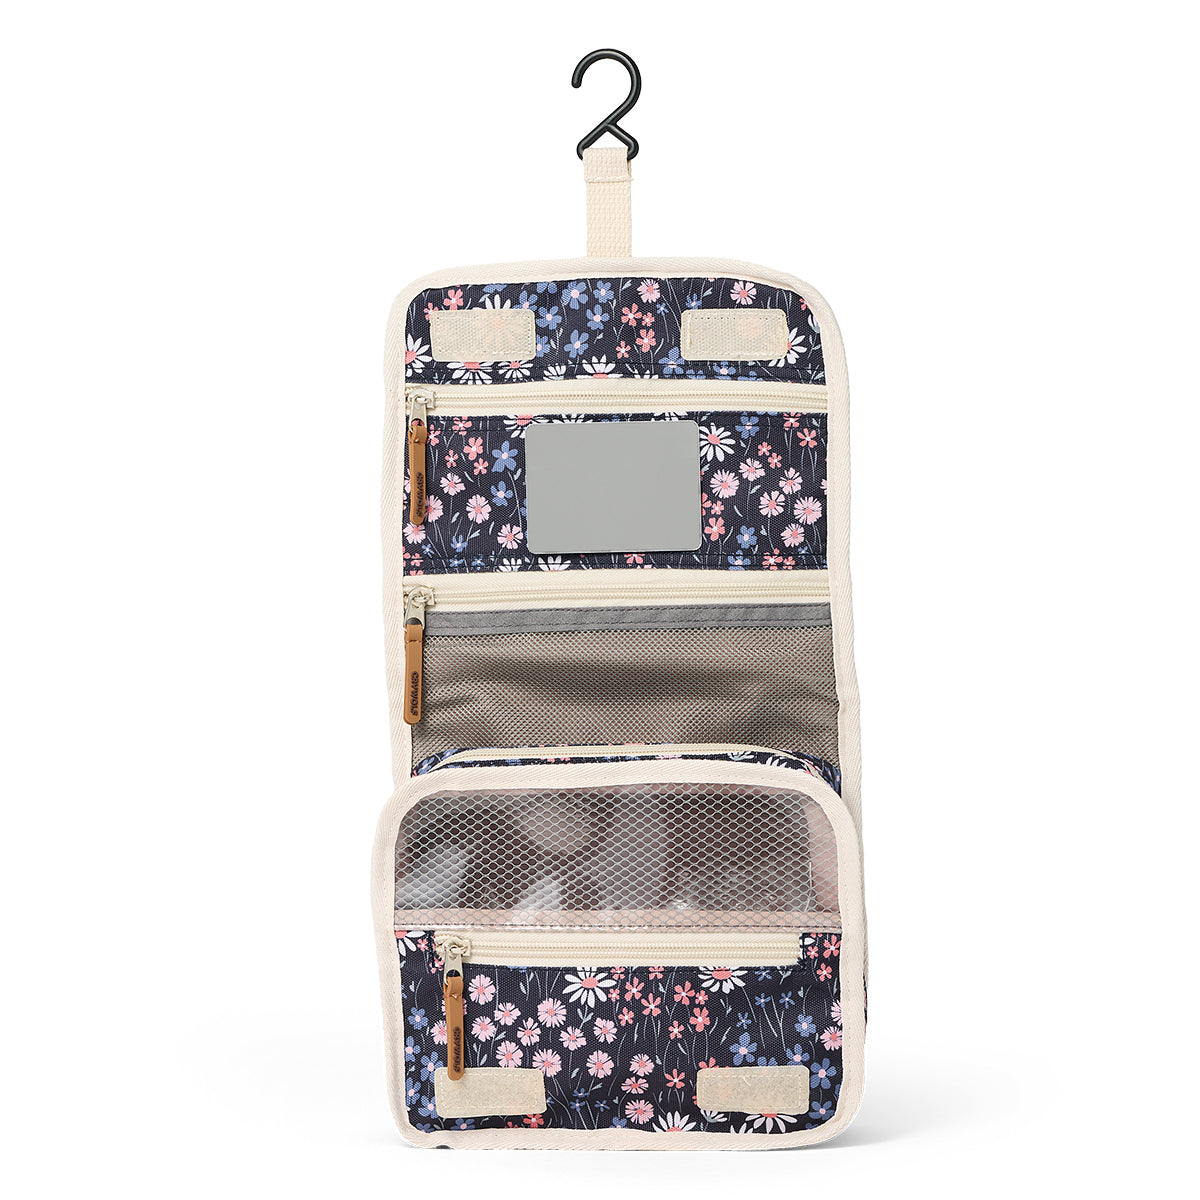 Crywolf | Cosmetic Bag - Winter Floral